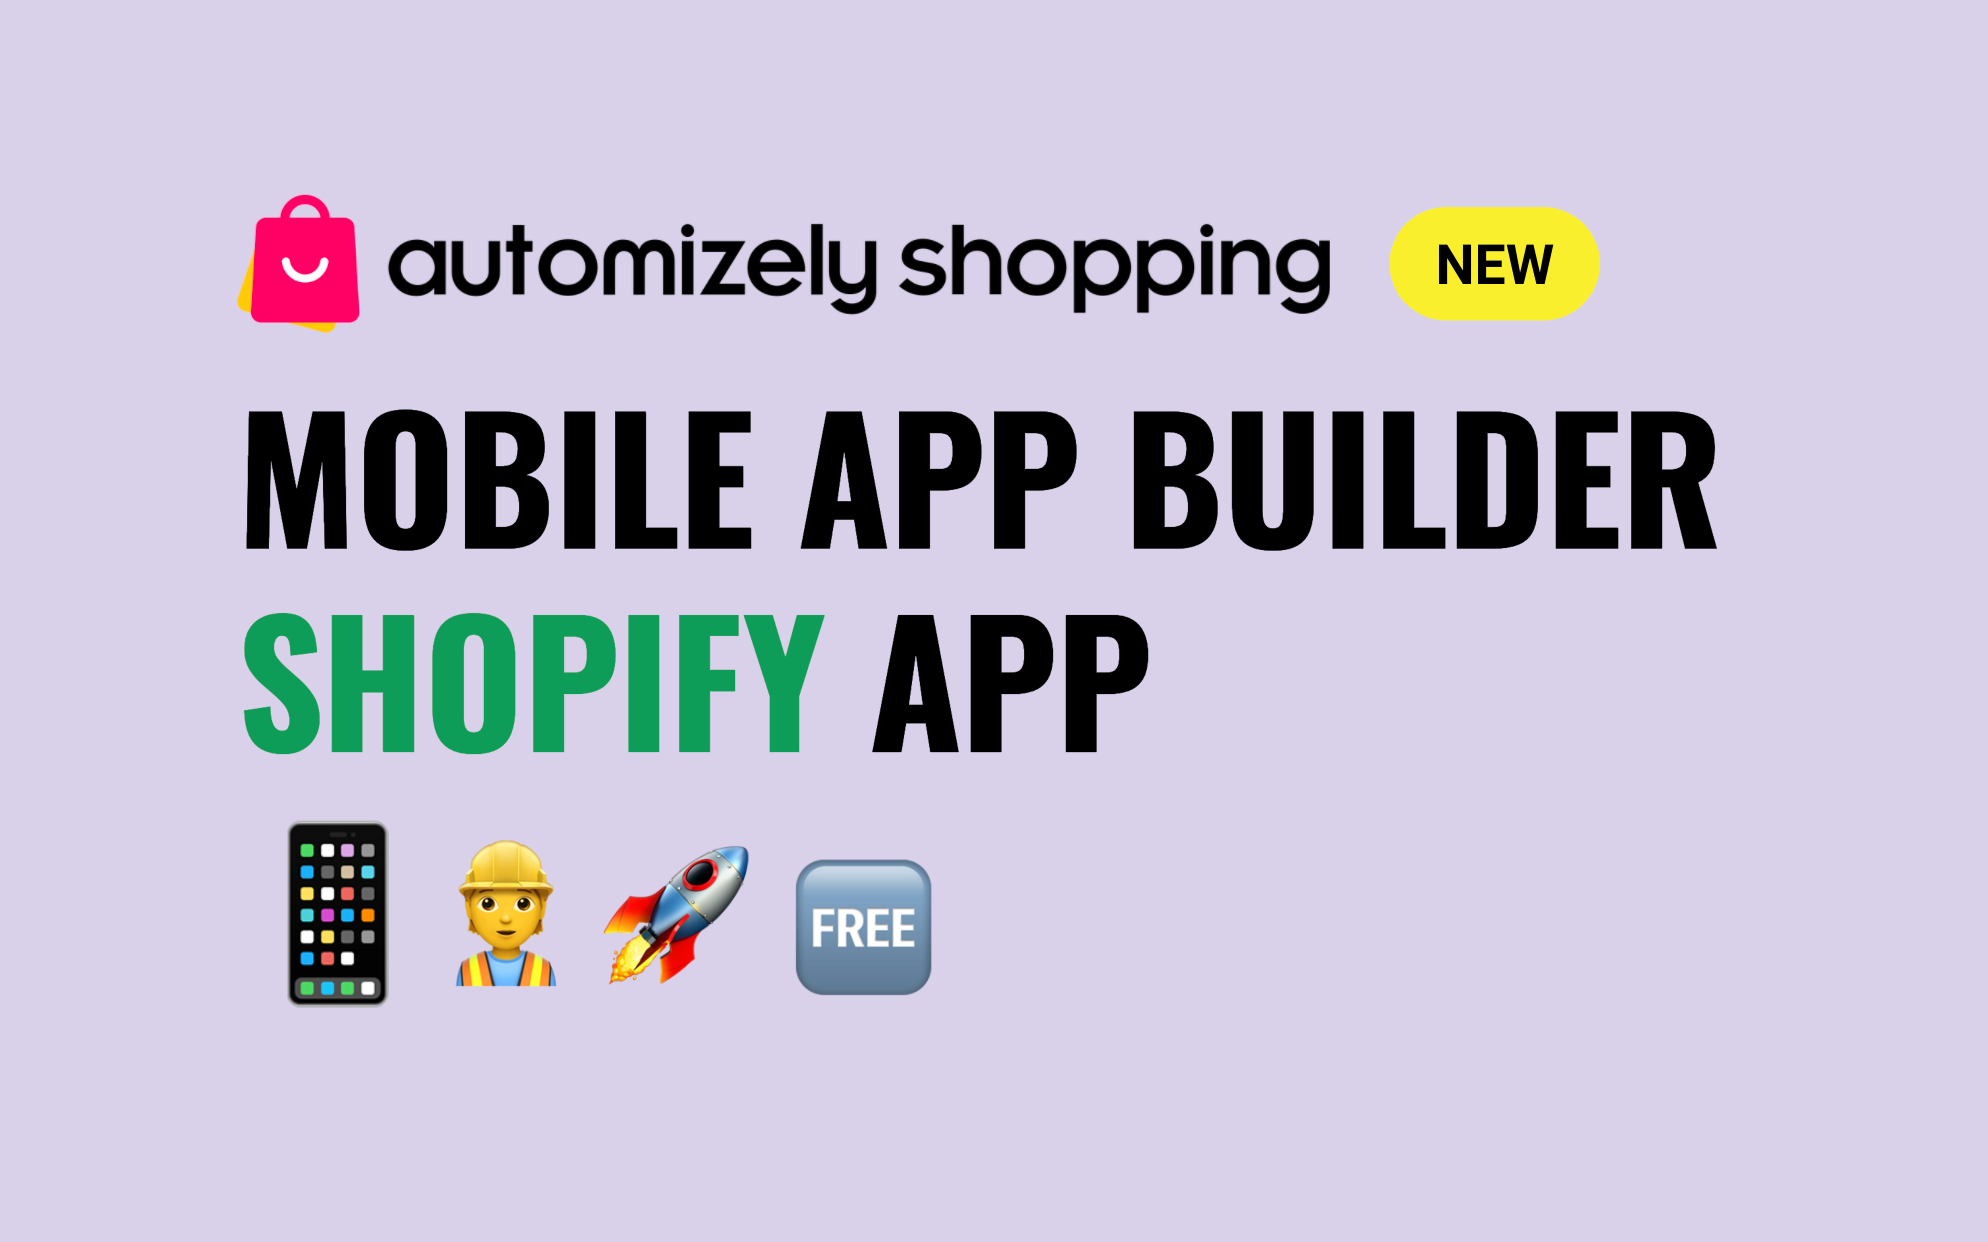 Announcing Automizely Shopping - Get free traffic and launch mobile store in a click for Shopify stores